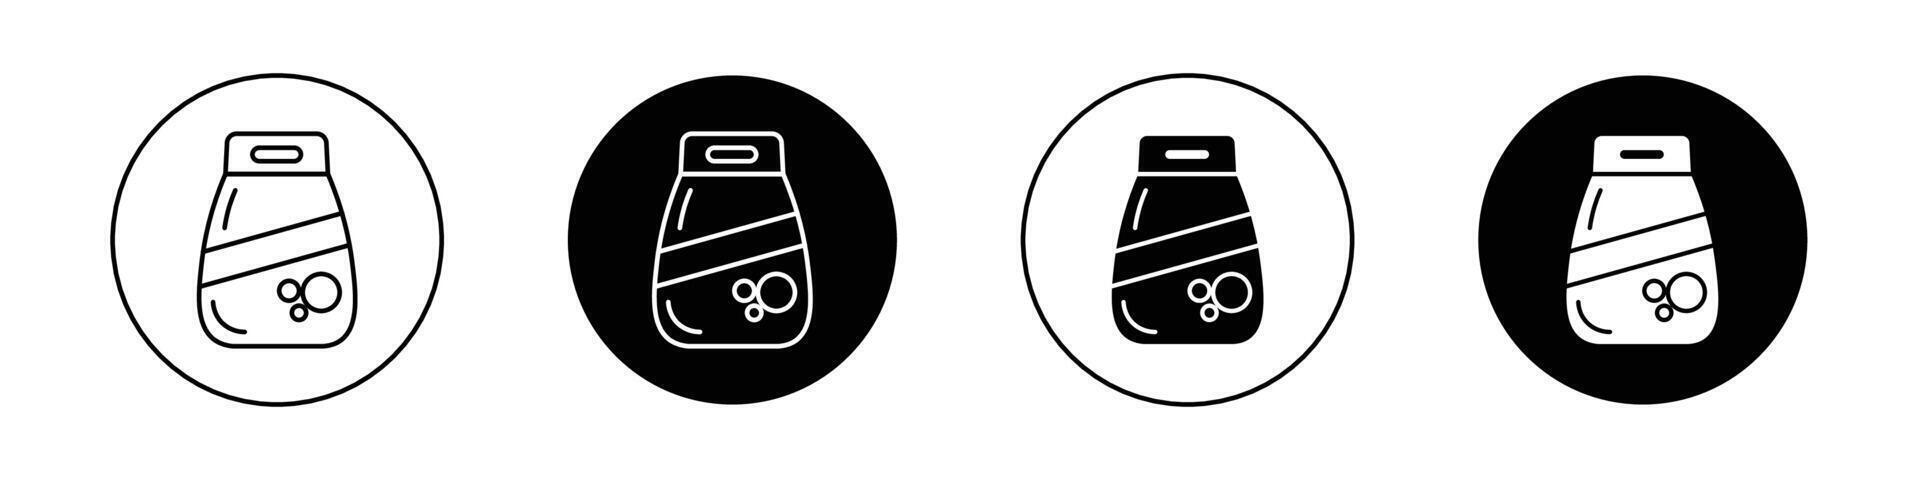 Laundry detergent pack icon vector